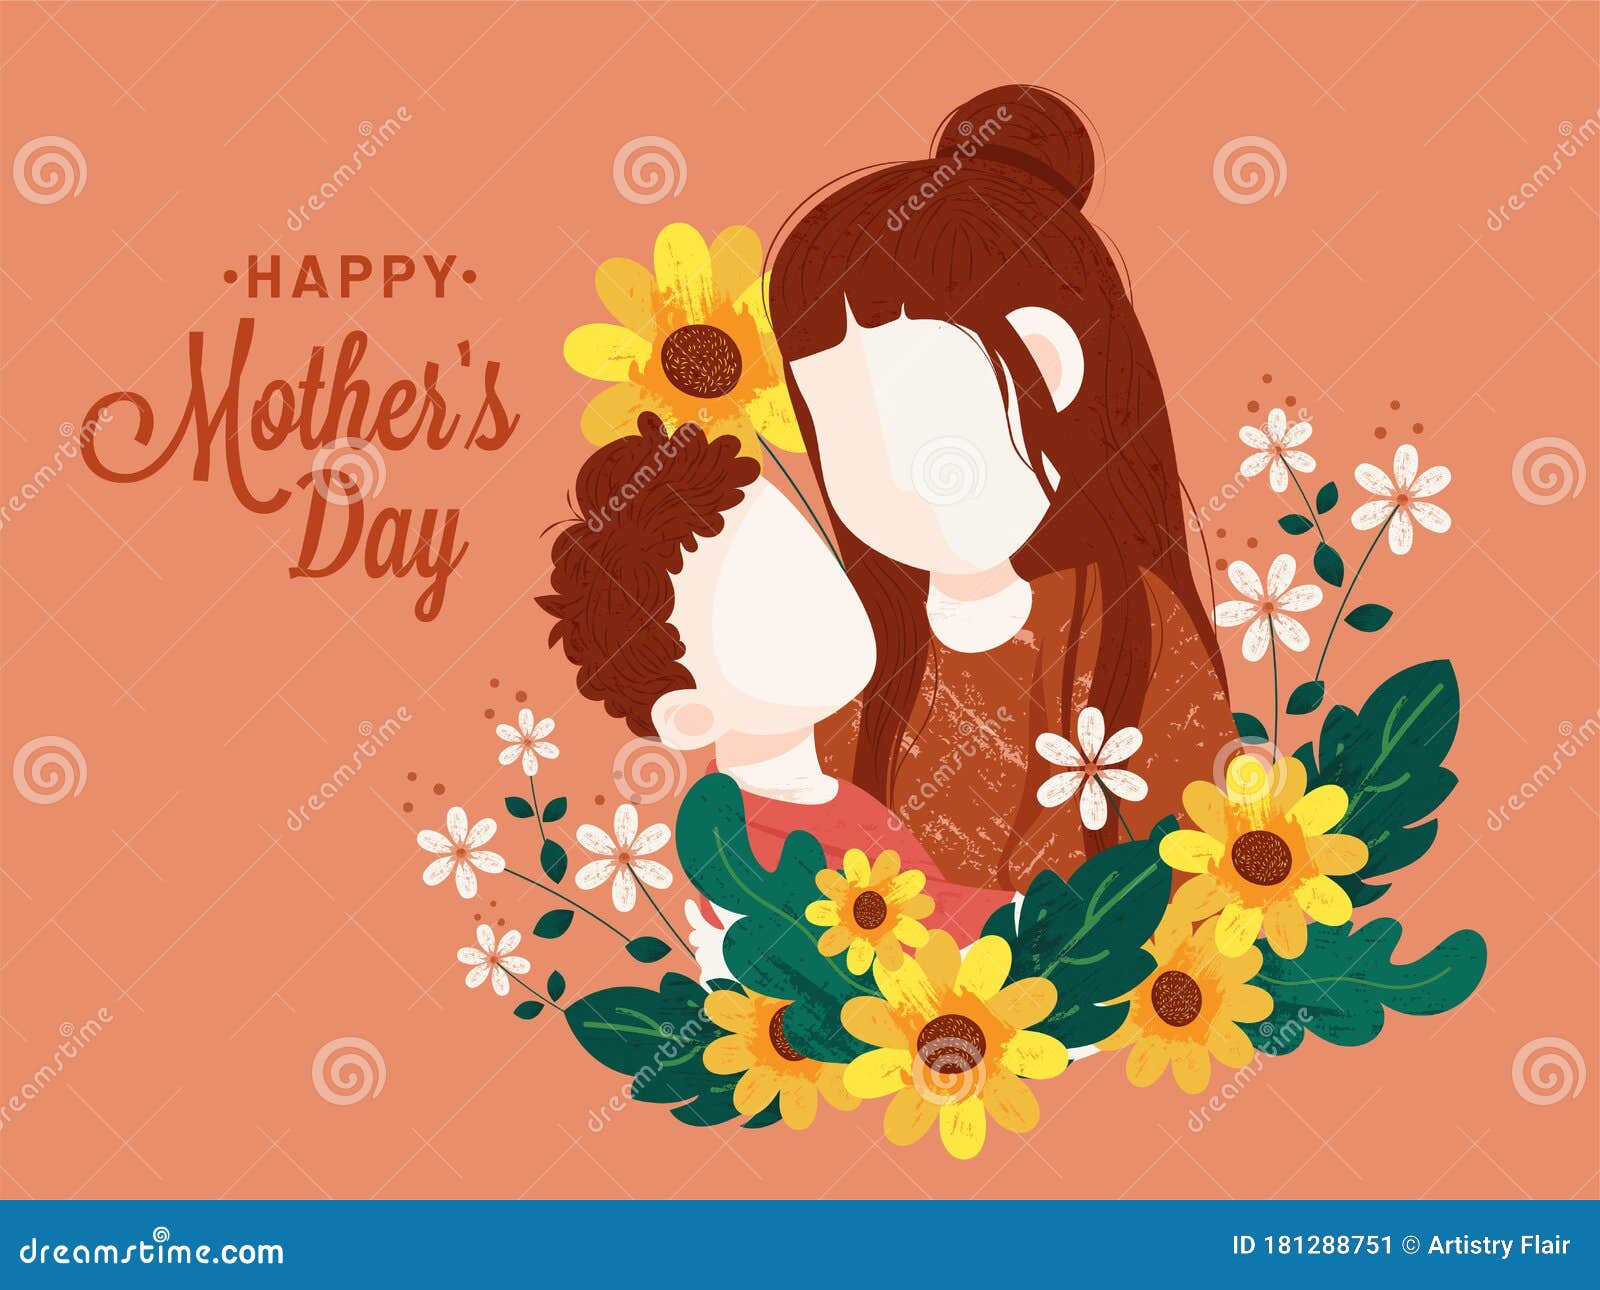 Mom gently making love to son Mother Son Hug Stock Illustrations 3 144 Mother Son Hug Stock Illustrations Vectors Clipart Dreamstime